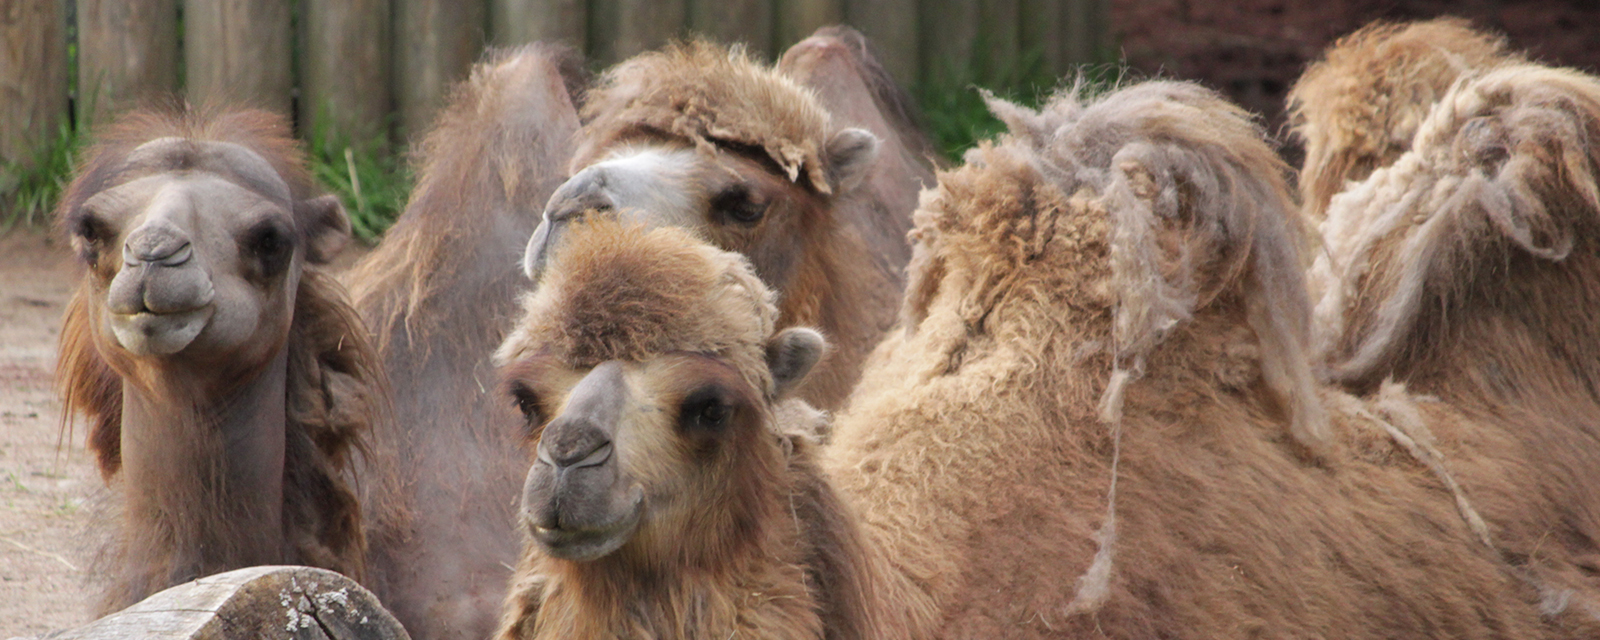 Bactrian Camel - Lincoln Park Zoo